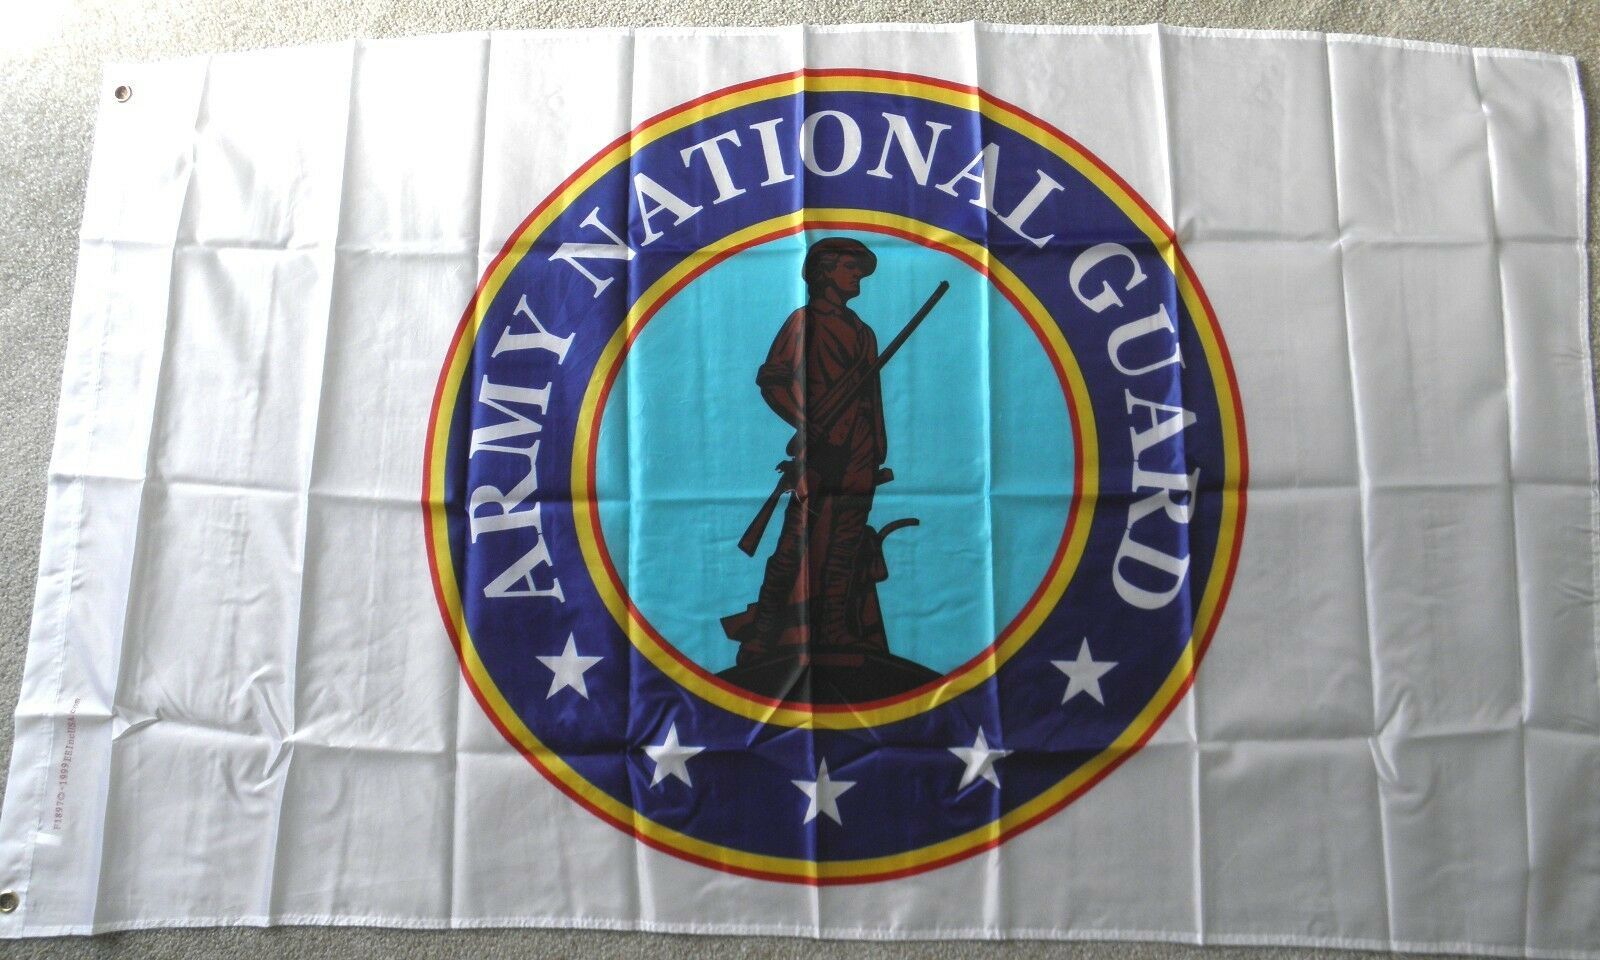 ARMY NATIONAL GUARD UNITED STATES  US MILITARY POLYESTER FLAG 3 X 5 FEET - $15.14